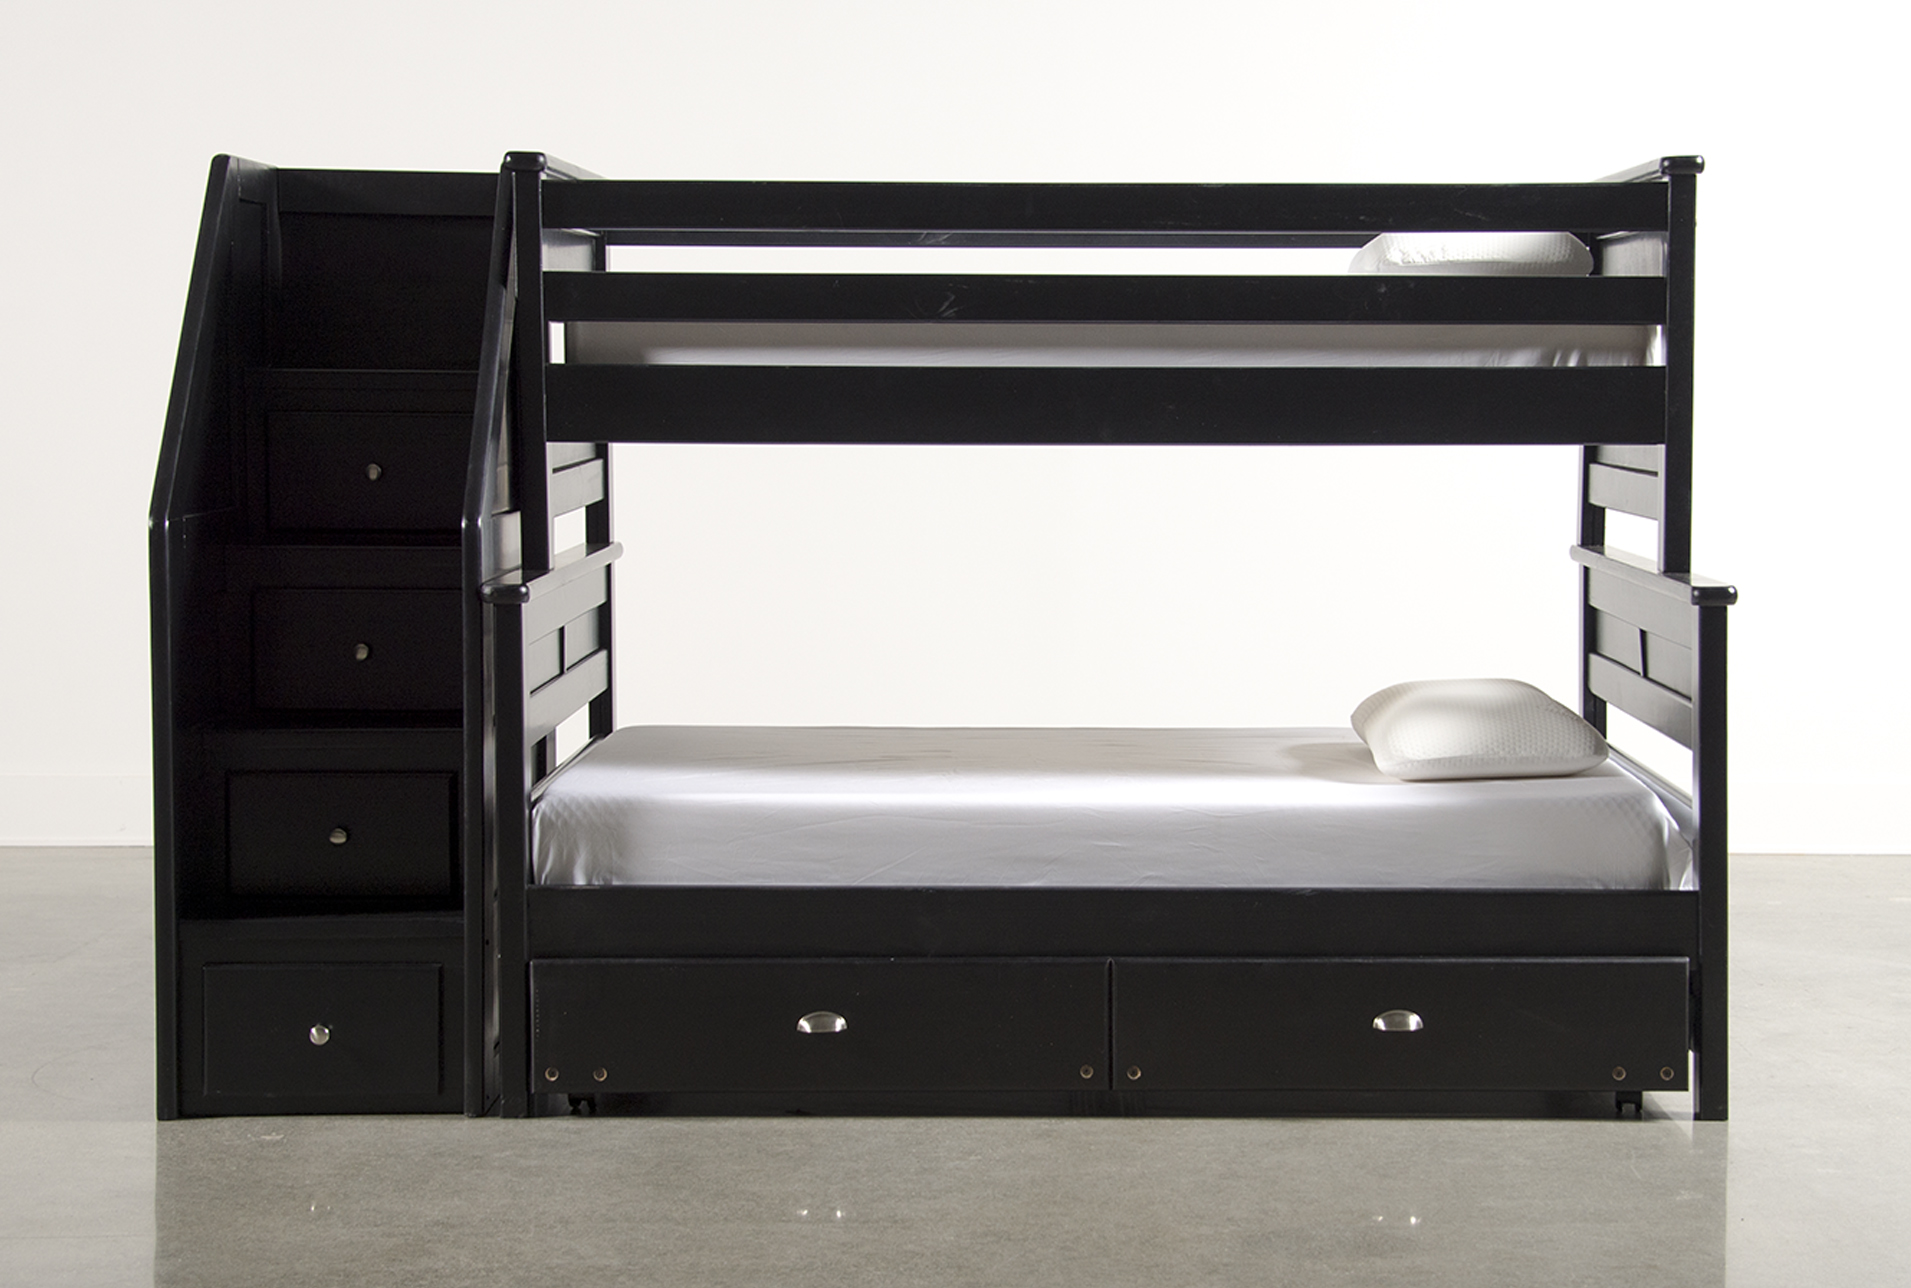 twin over twin bunk bed with trundle and storage drawers